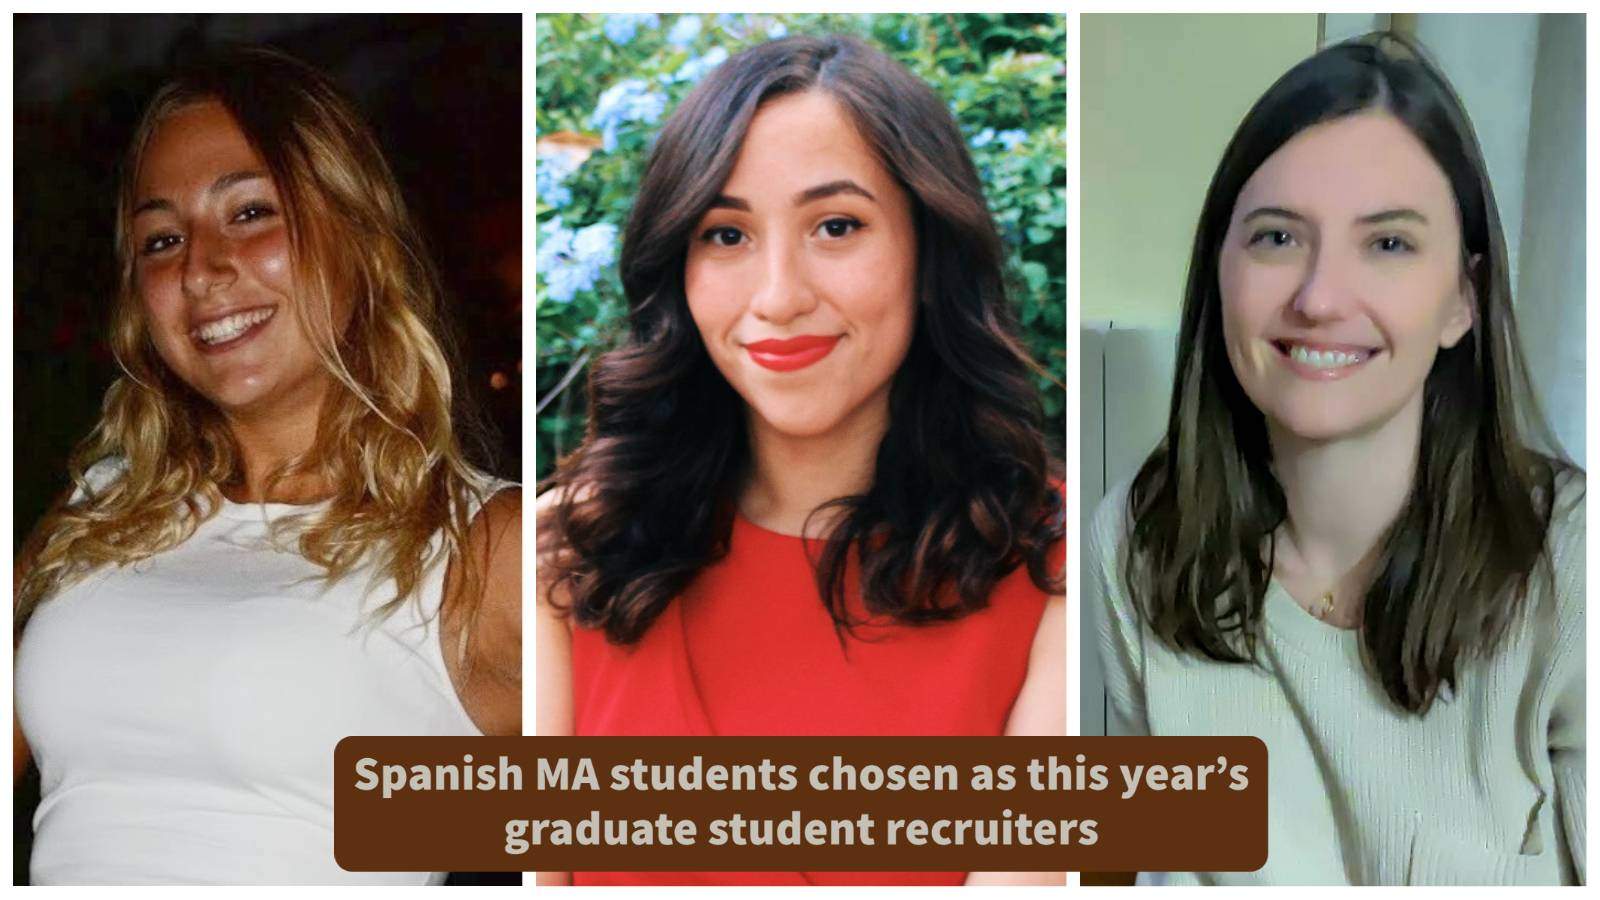 three women, one dressed in white in front of a dark background, one dressed in red in front of greenery, one dressed in light green in front of a pale green wall. Text: Spanish MA students chosen as this year’s graduate student recruiters